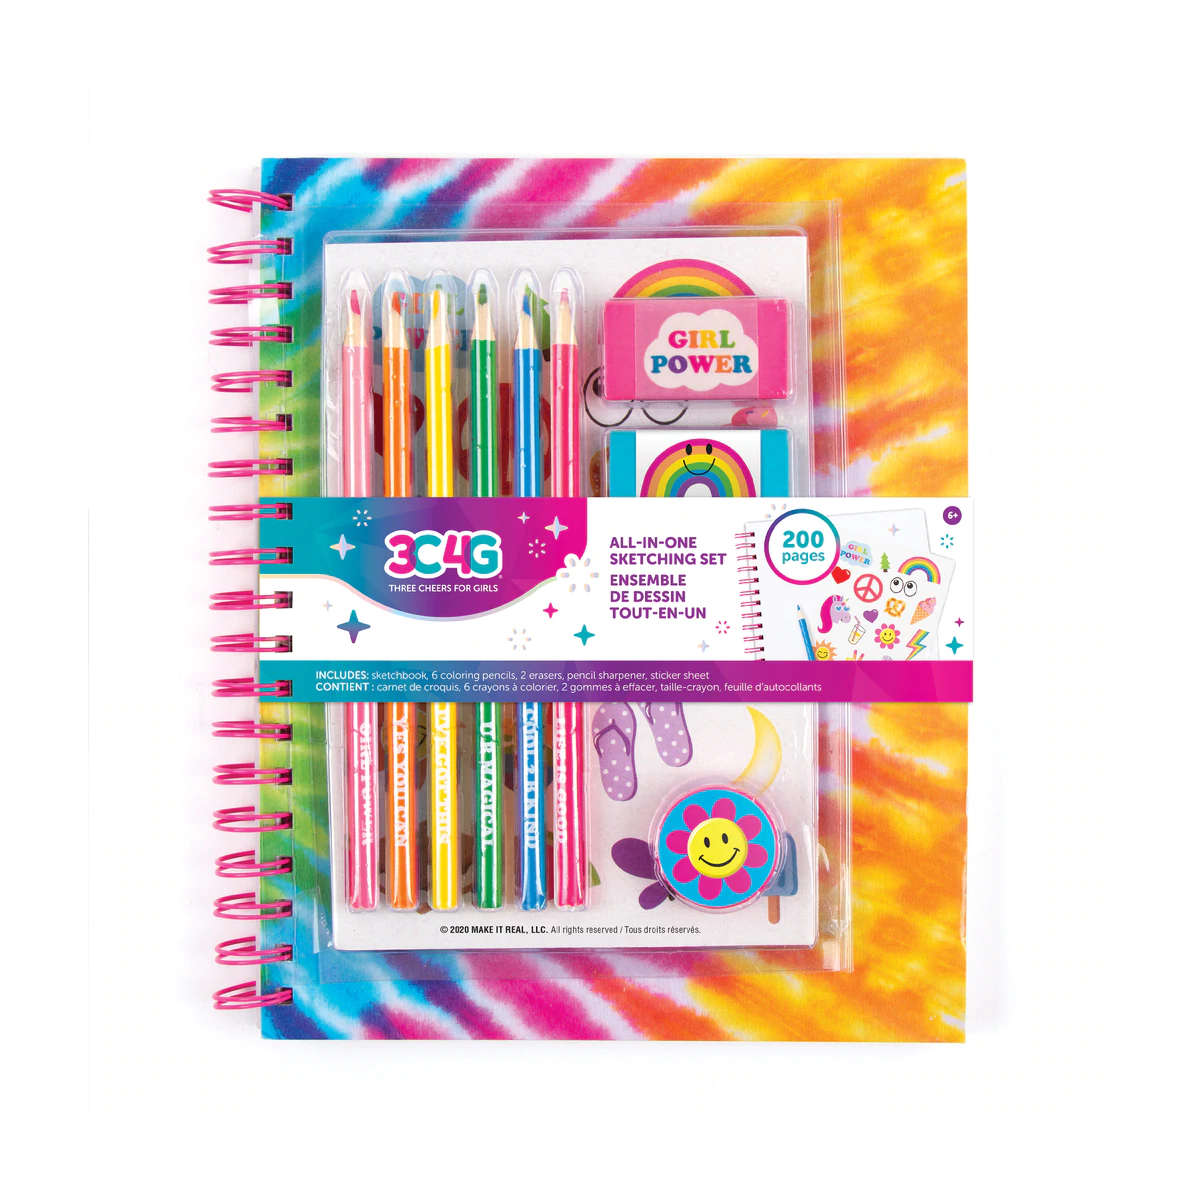 Make It Real All-In-One Sketching Set: Tie Dye